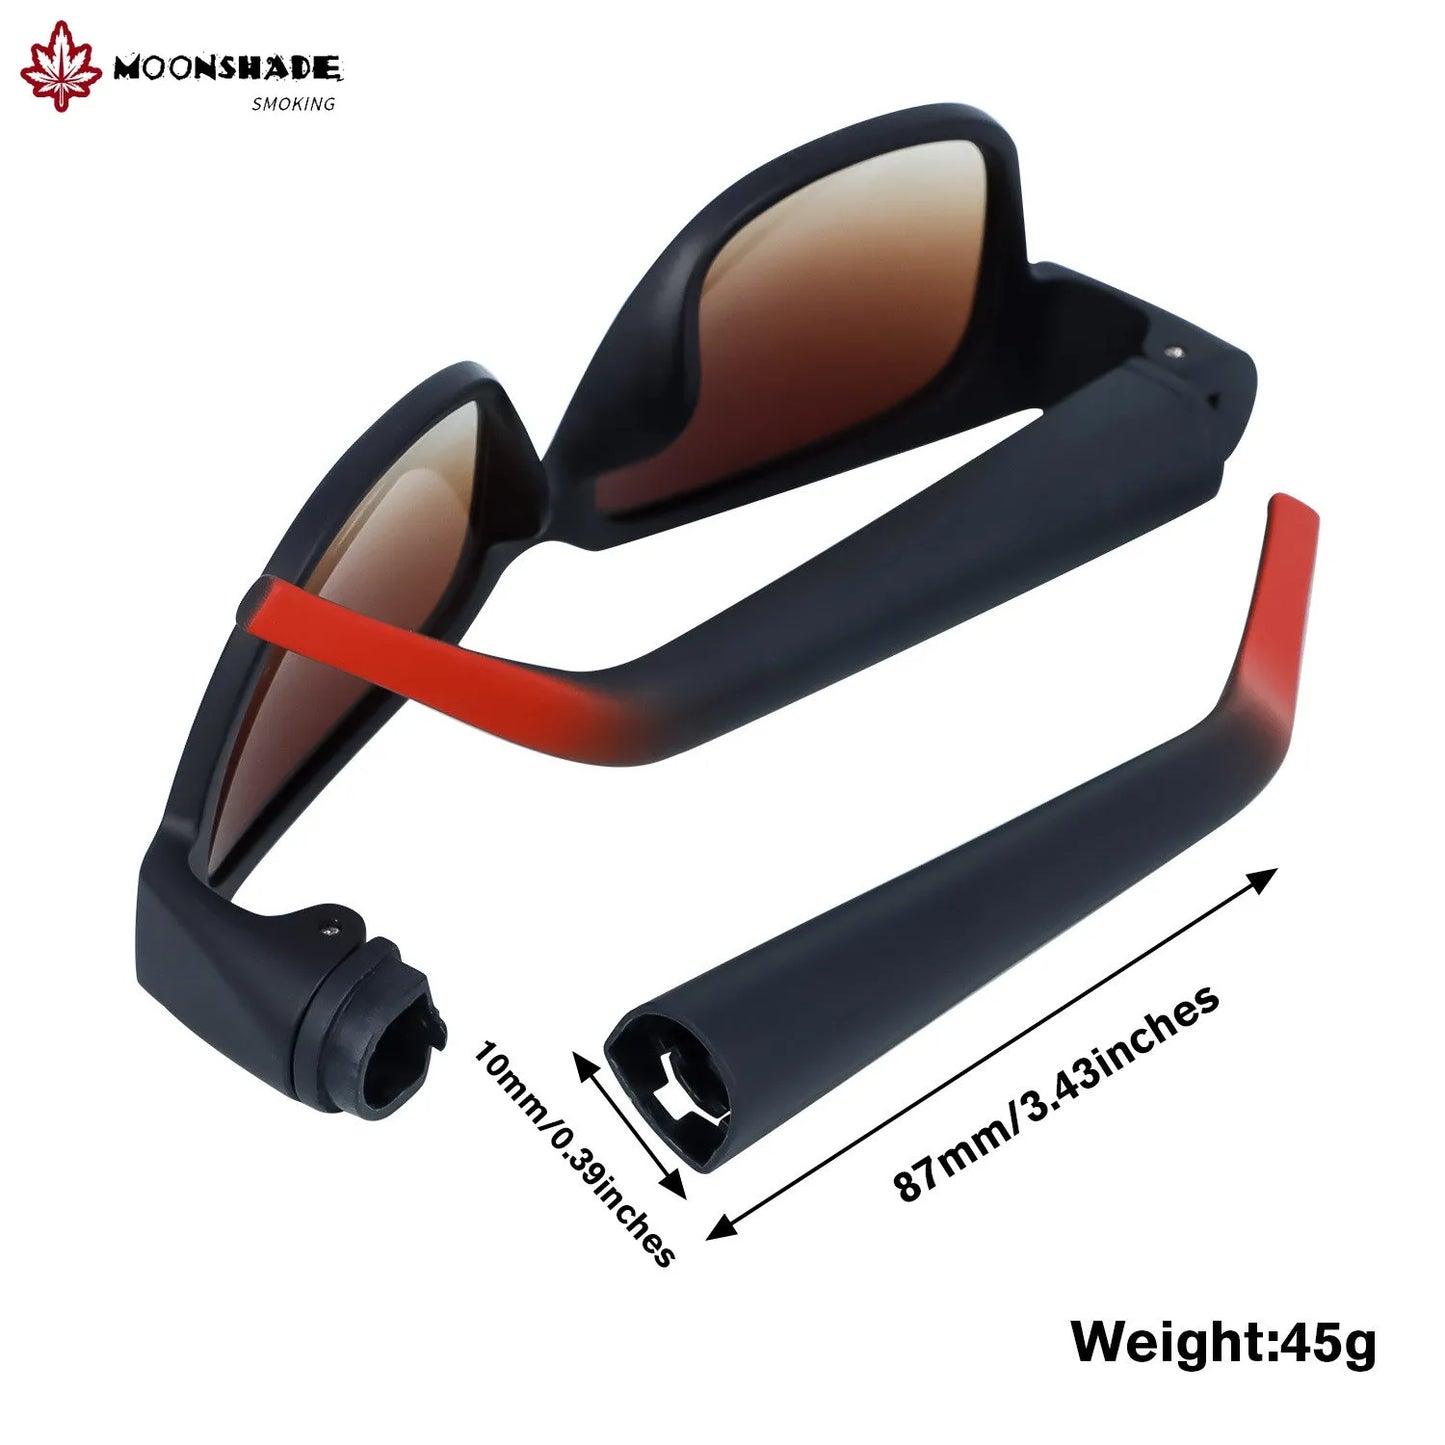 Moonshade Sunglasses With Hidden Storage Tube Compartment